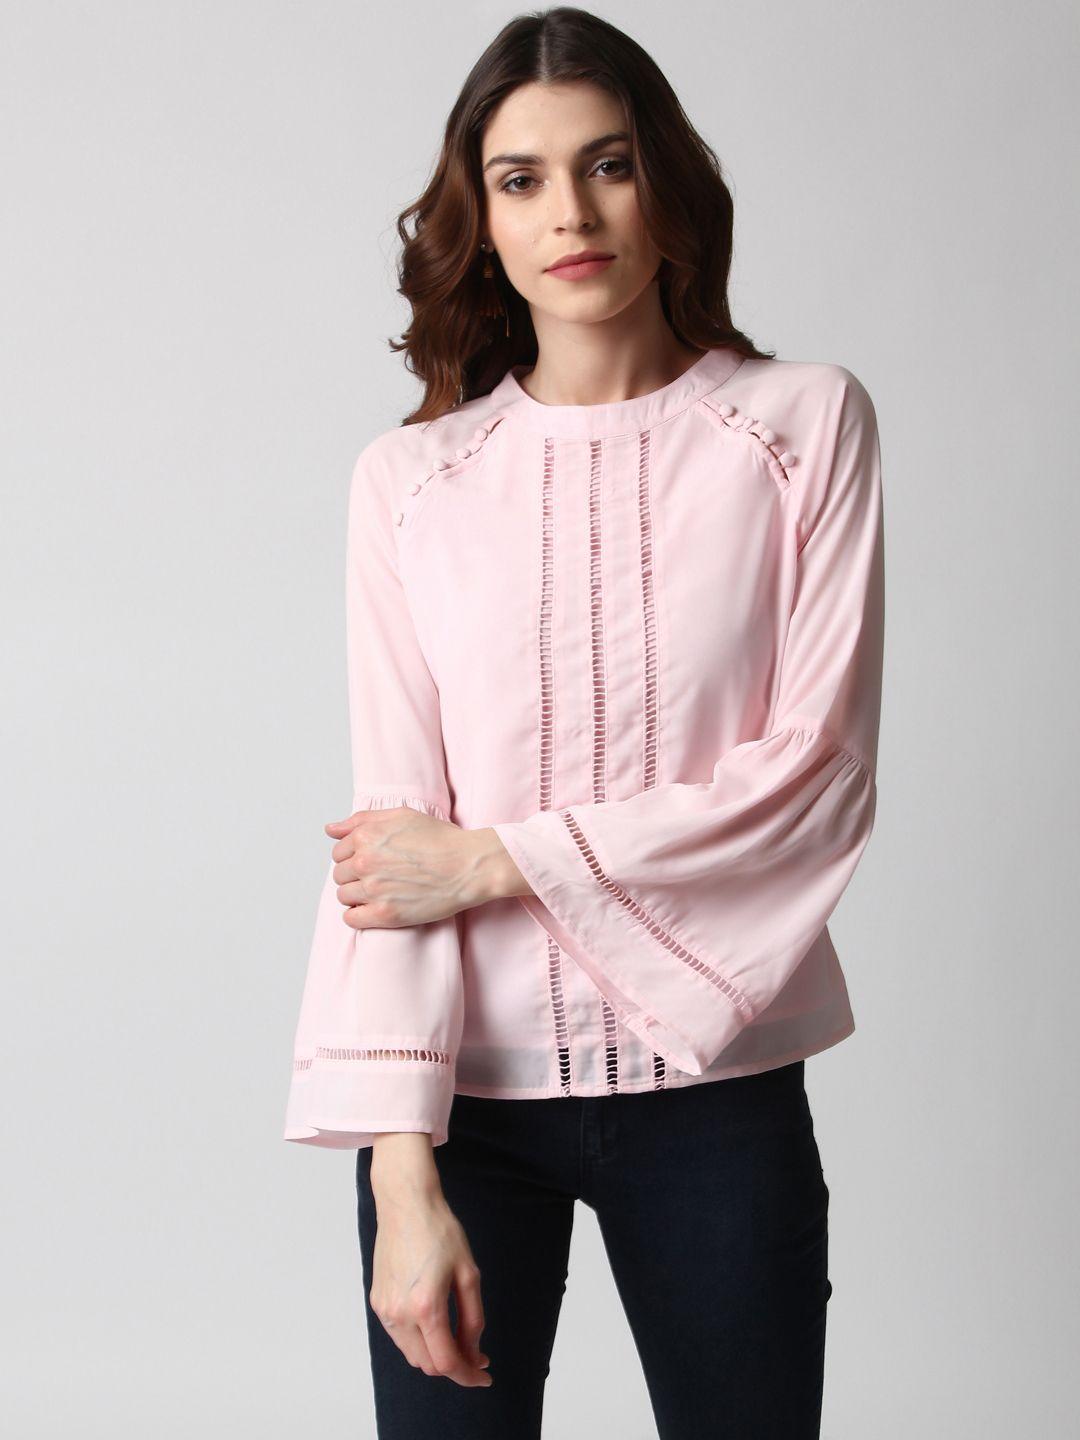 marie claire women pink solid top